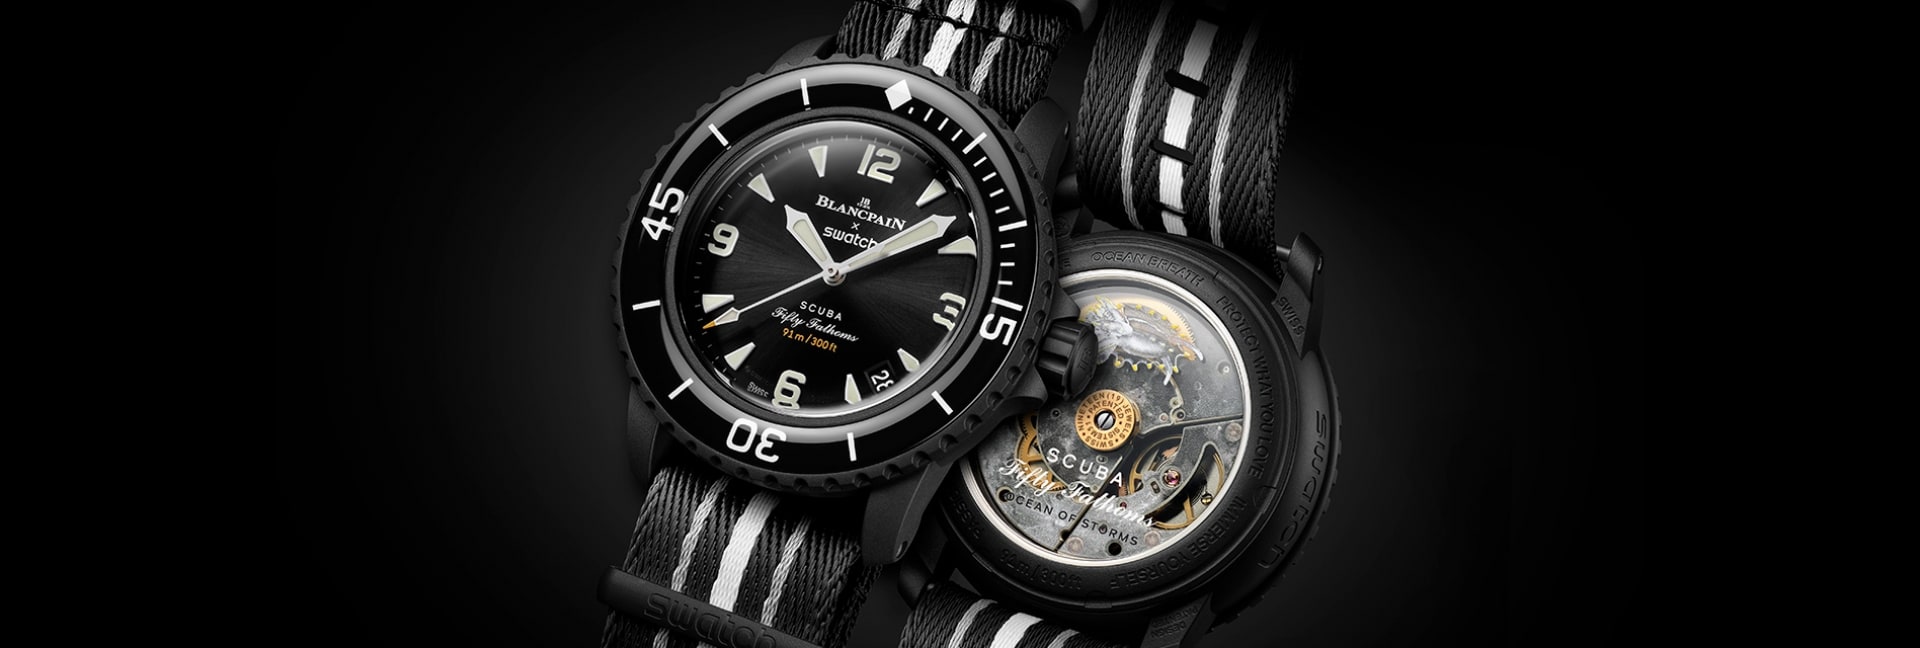 Blancpain x Swatch Fifty Fathoms Ocean of Storms watch